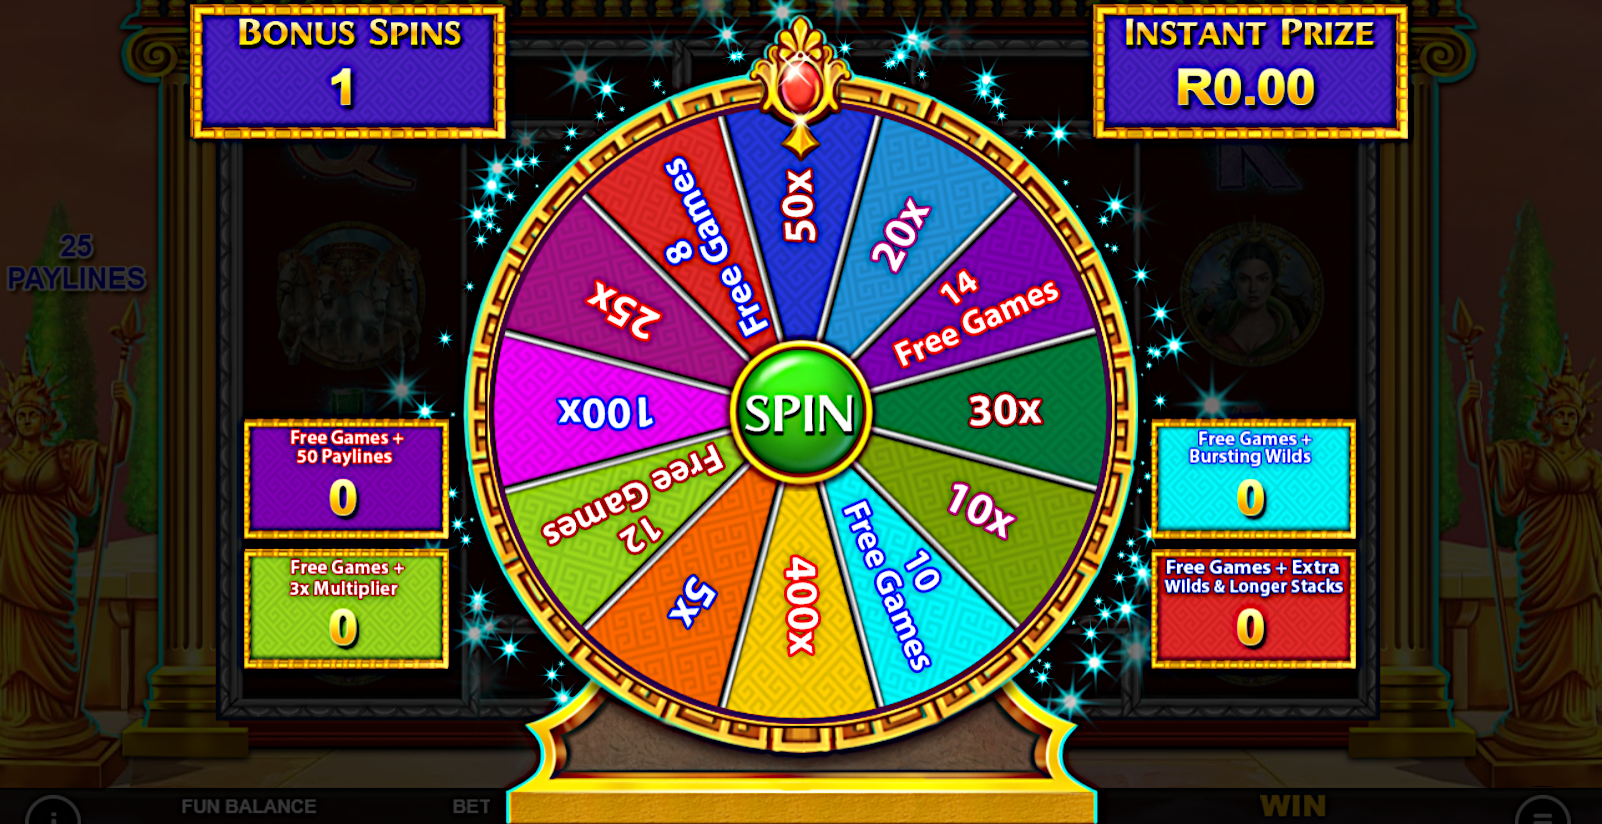 Legend of Helios slot at Punt casino features an exciting bonus wheel packed with prizes and free spins.